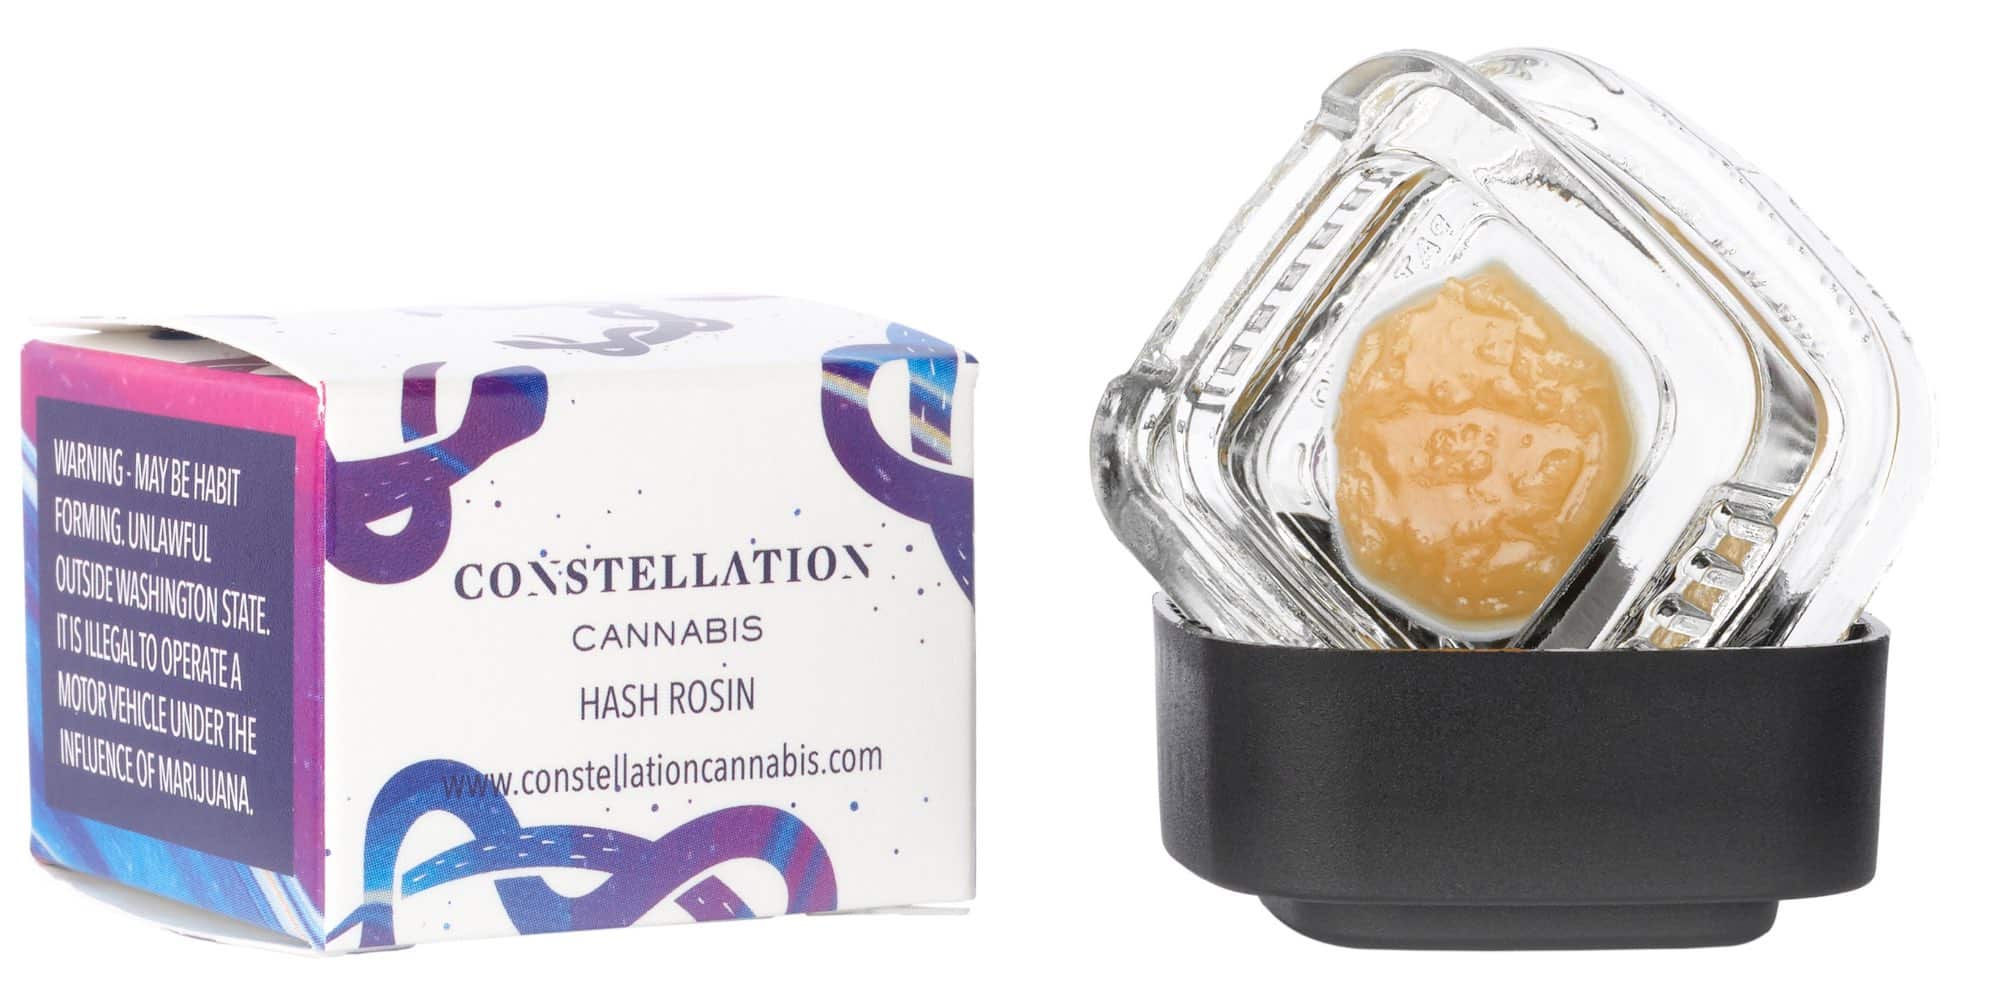 Constellation Cannabis Cold Cure Hash Rosin Weed Extract Concentrate Dab